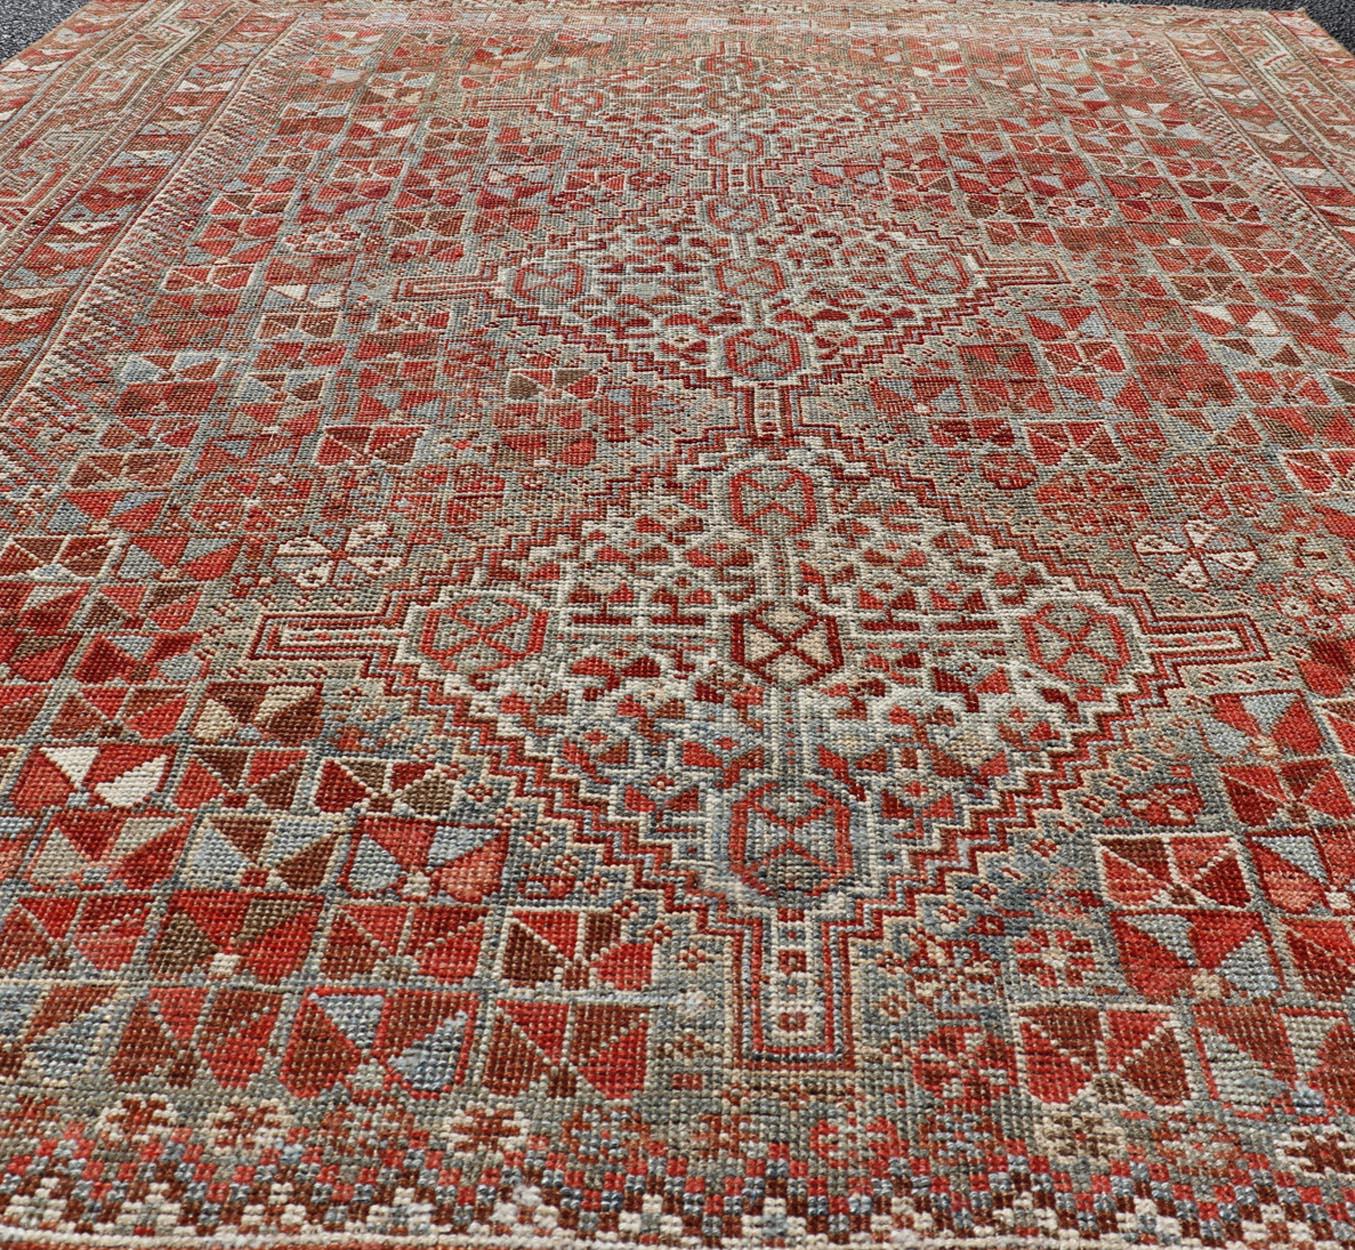 Antique Distressed Persian Medallion Shiraz Rug in Shades Rusty Red & Steel Blue For Sale 2